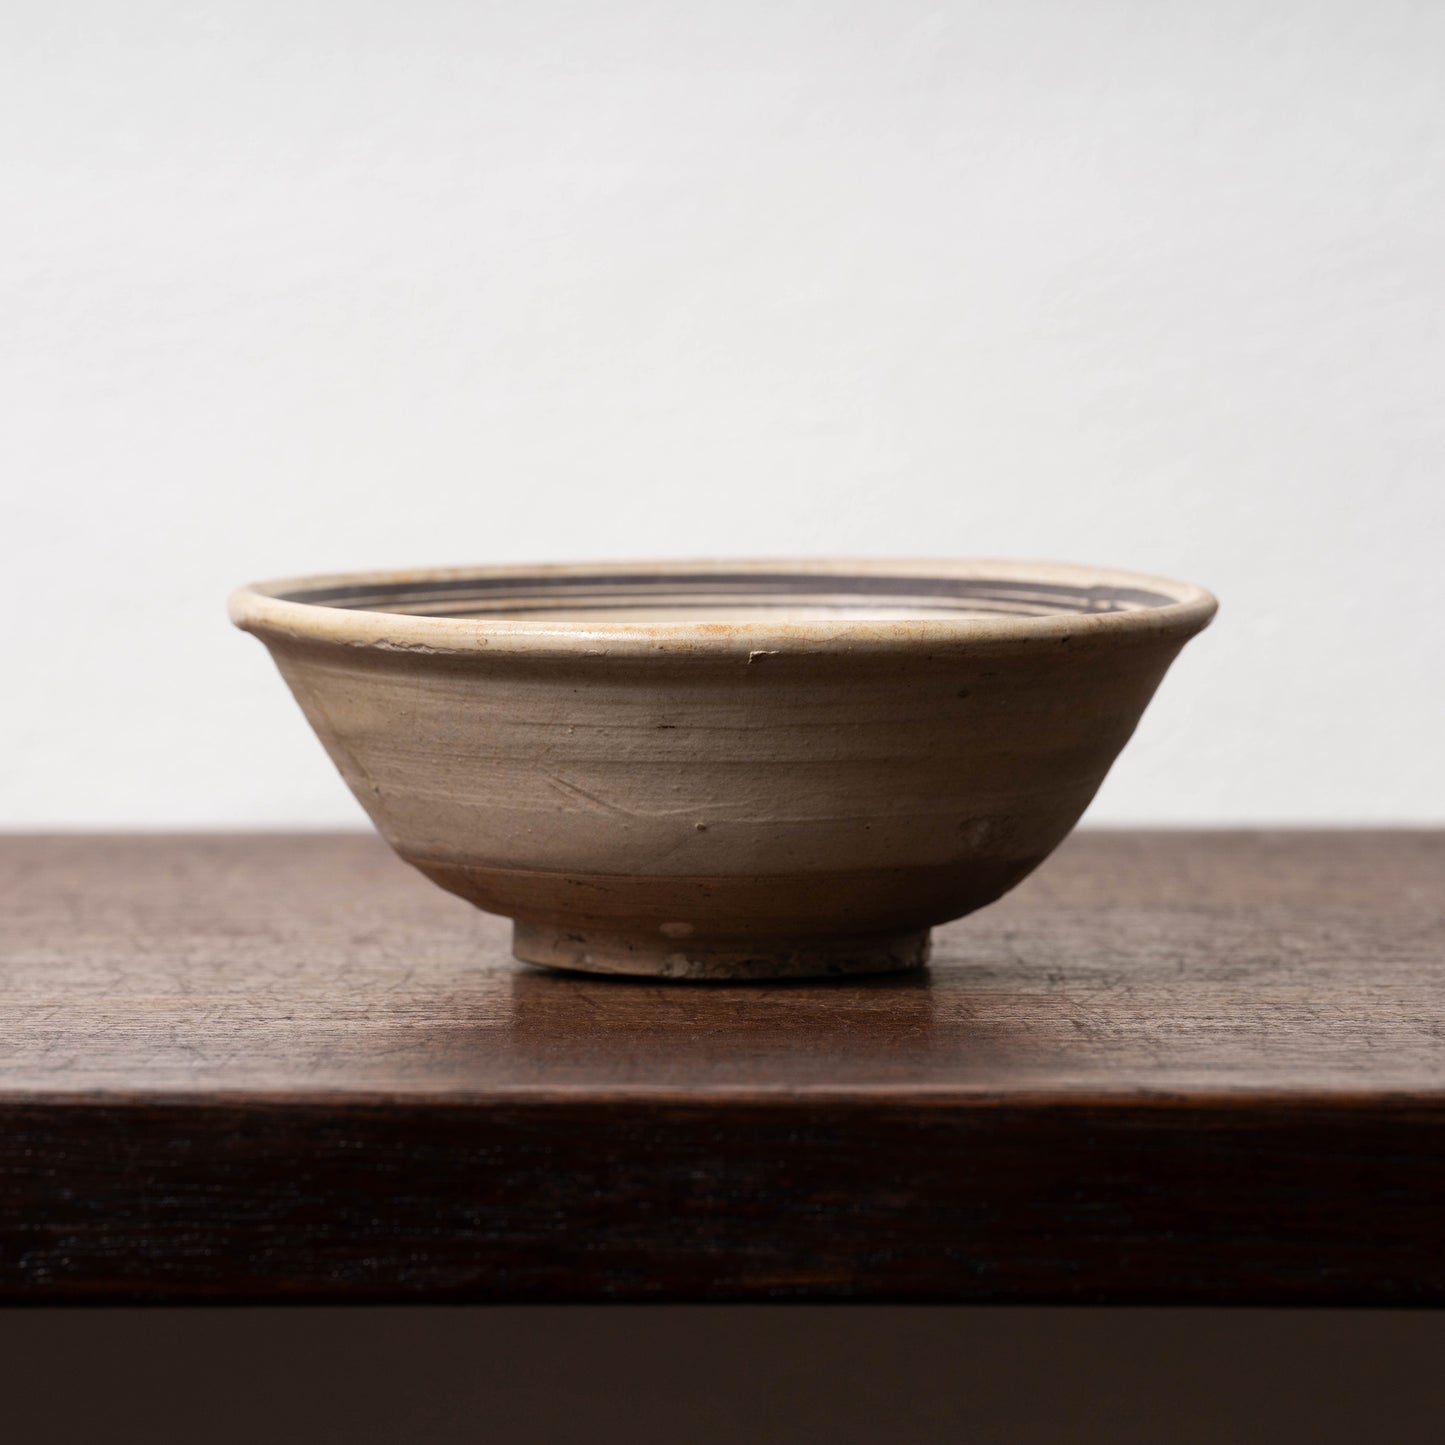 Southern Song Dynasty Cizhou Ware White and Black Teabowl with Chinese characters Design